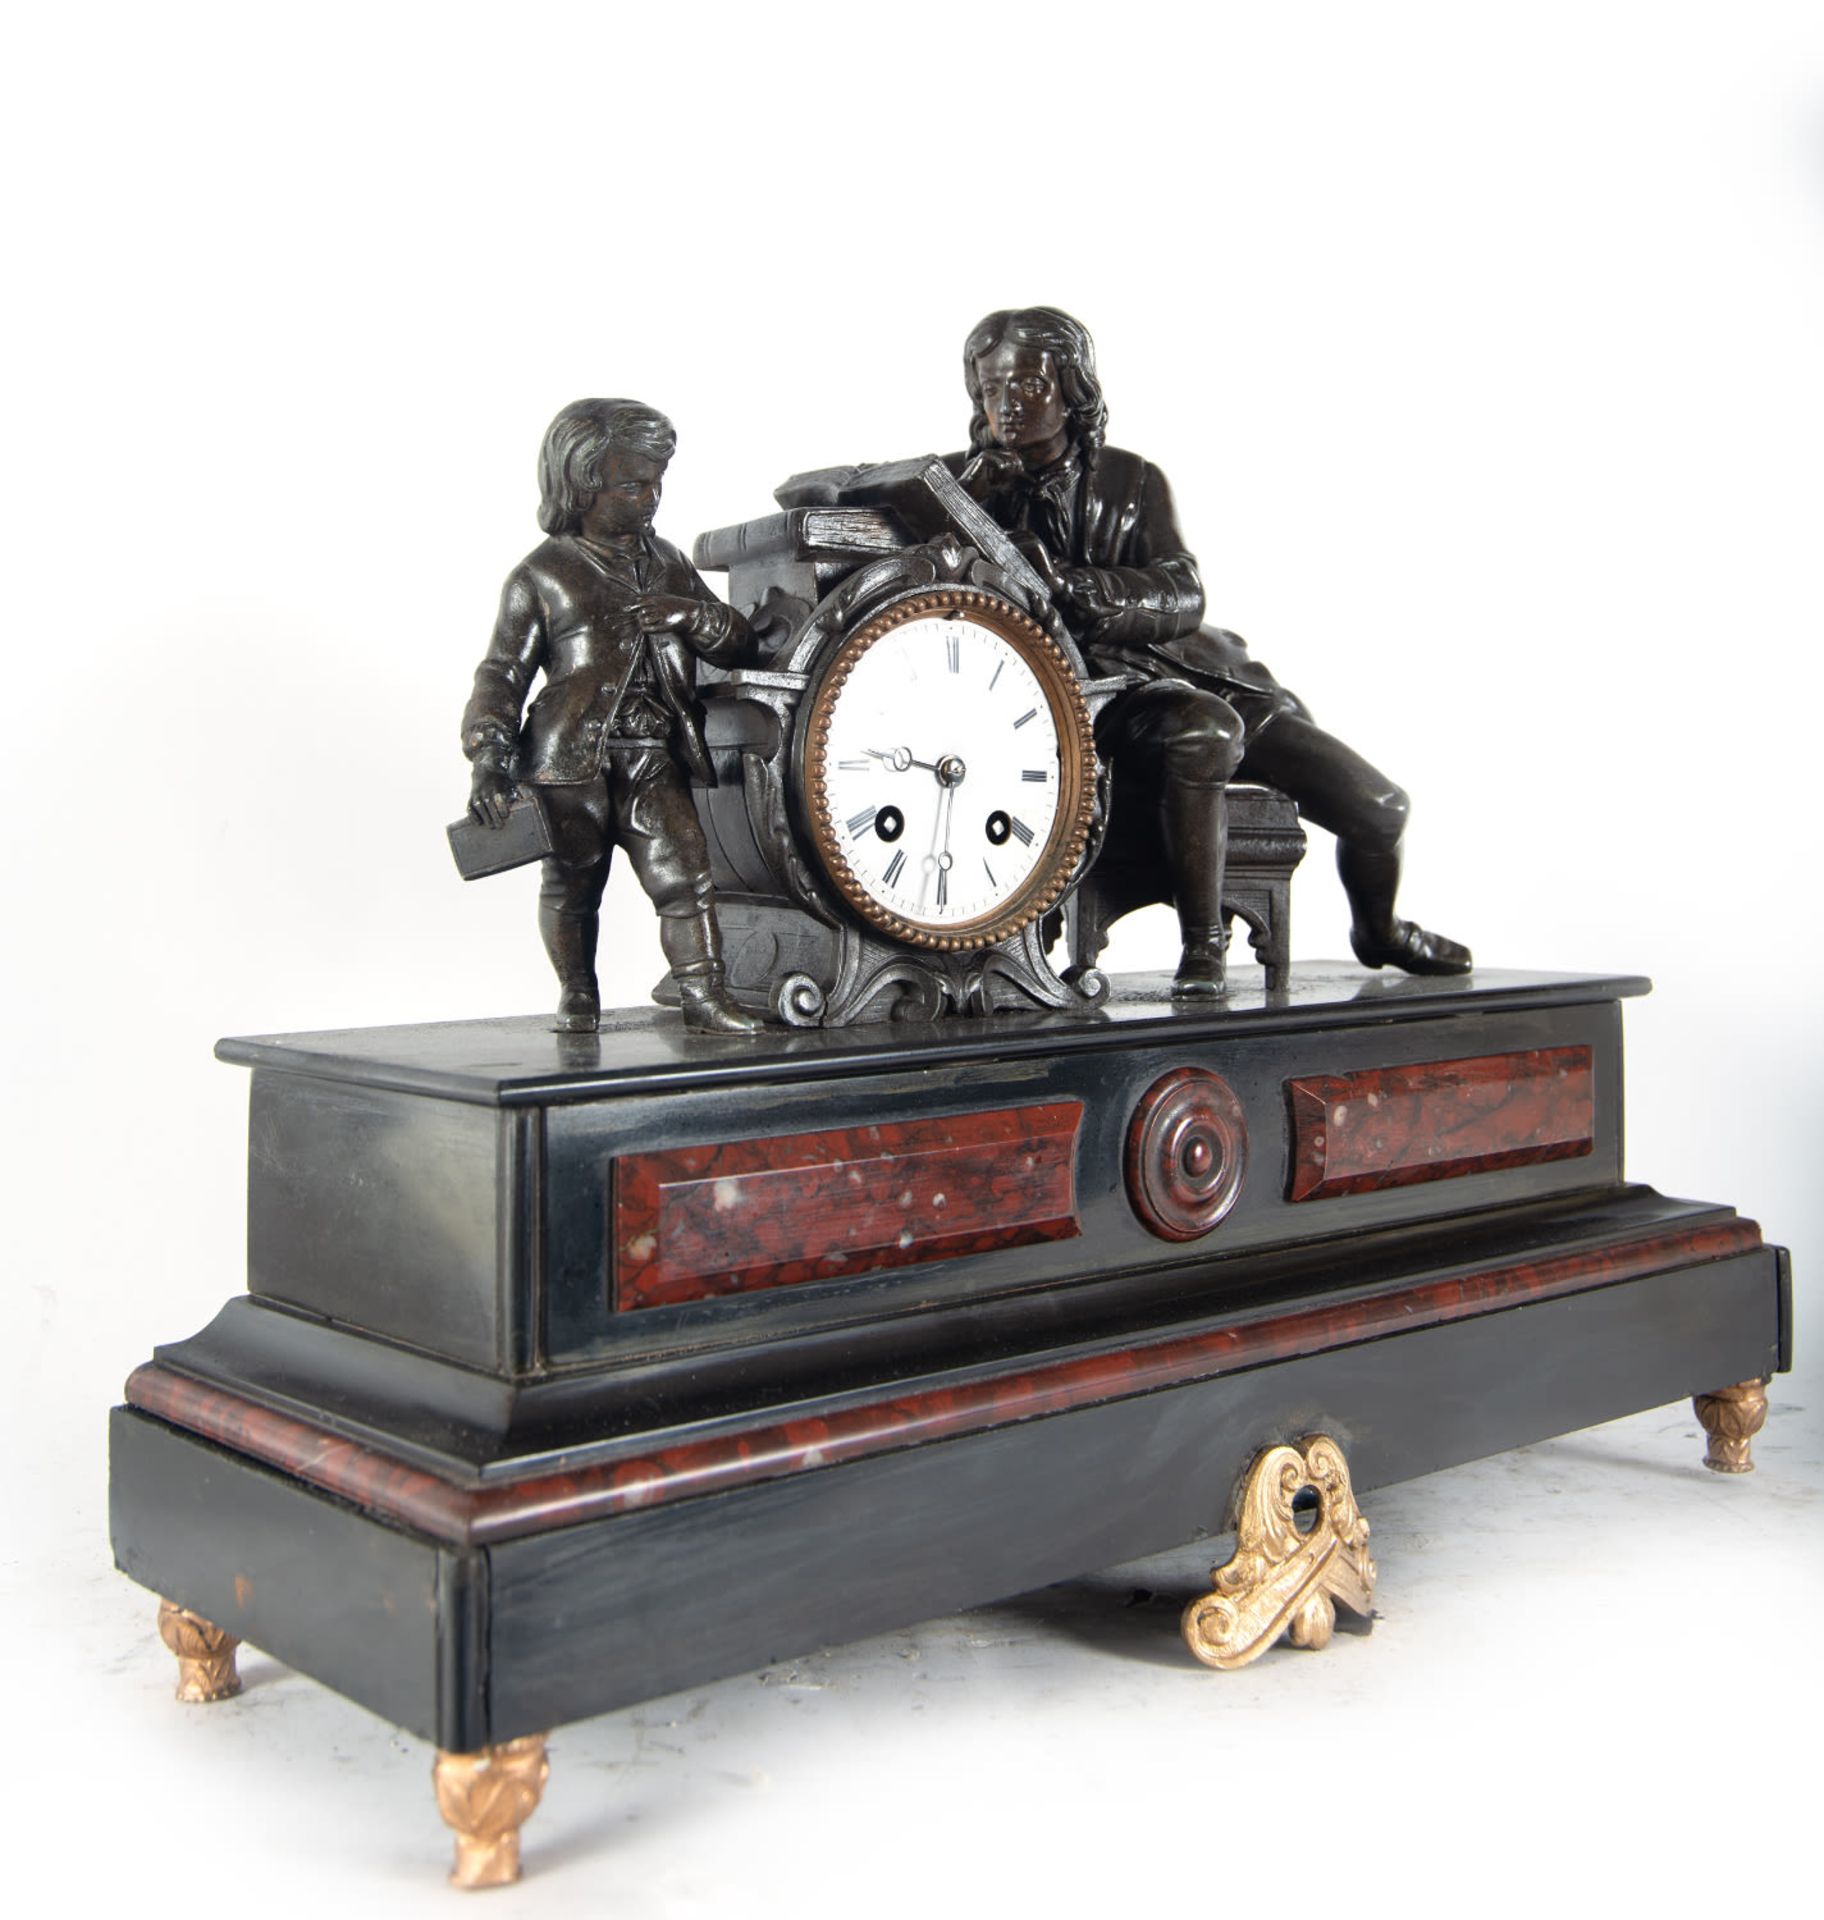 Neoclassical style clock in marble and calamine representing a reading lesson, late 19th century - Image 3 of 4